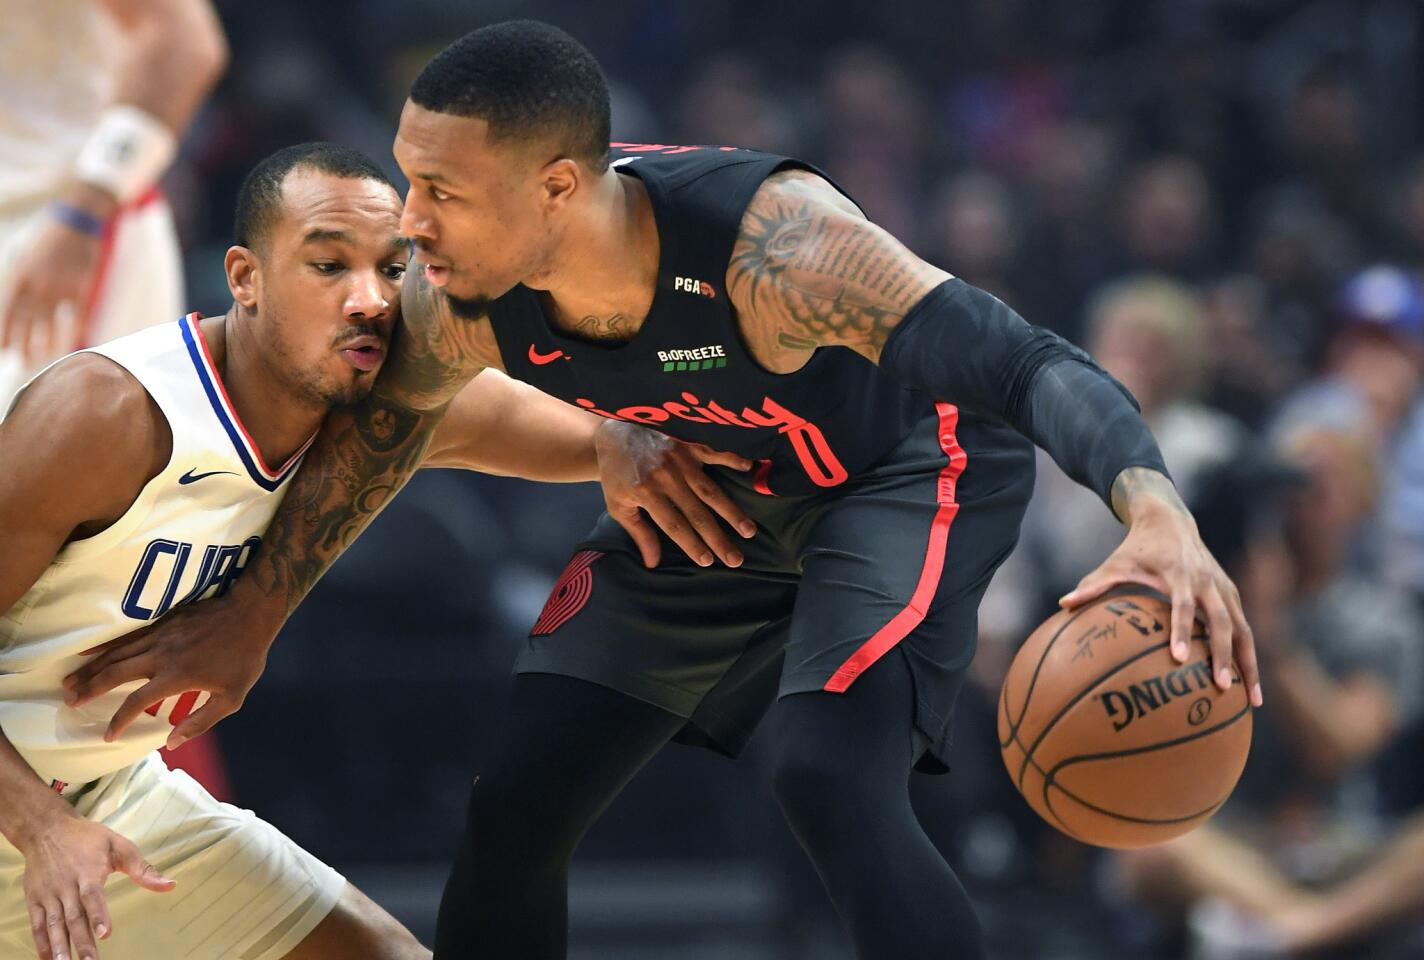 Clippers guard Avery Bradley defends Trailblazers guard Damian Lillard in the 1st quarter at the Staples Center on Monday.